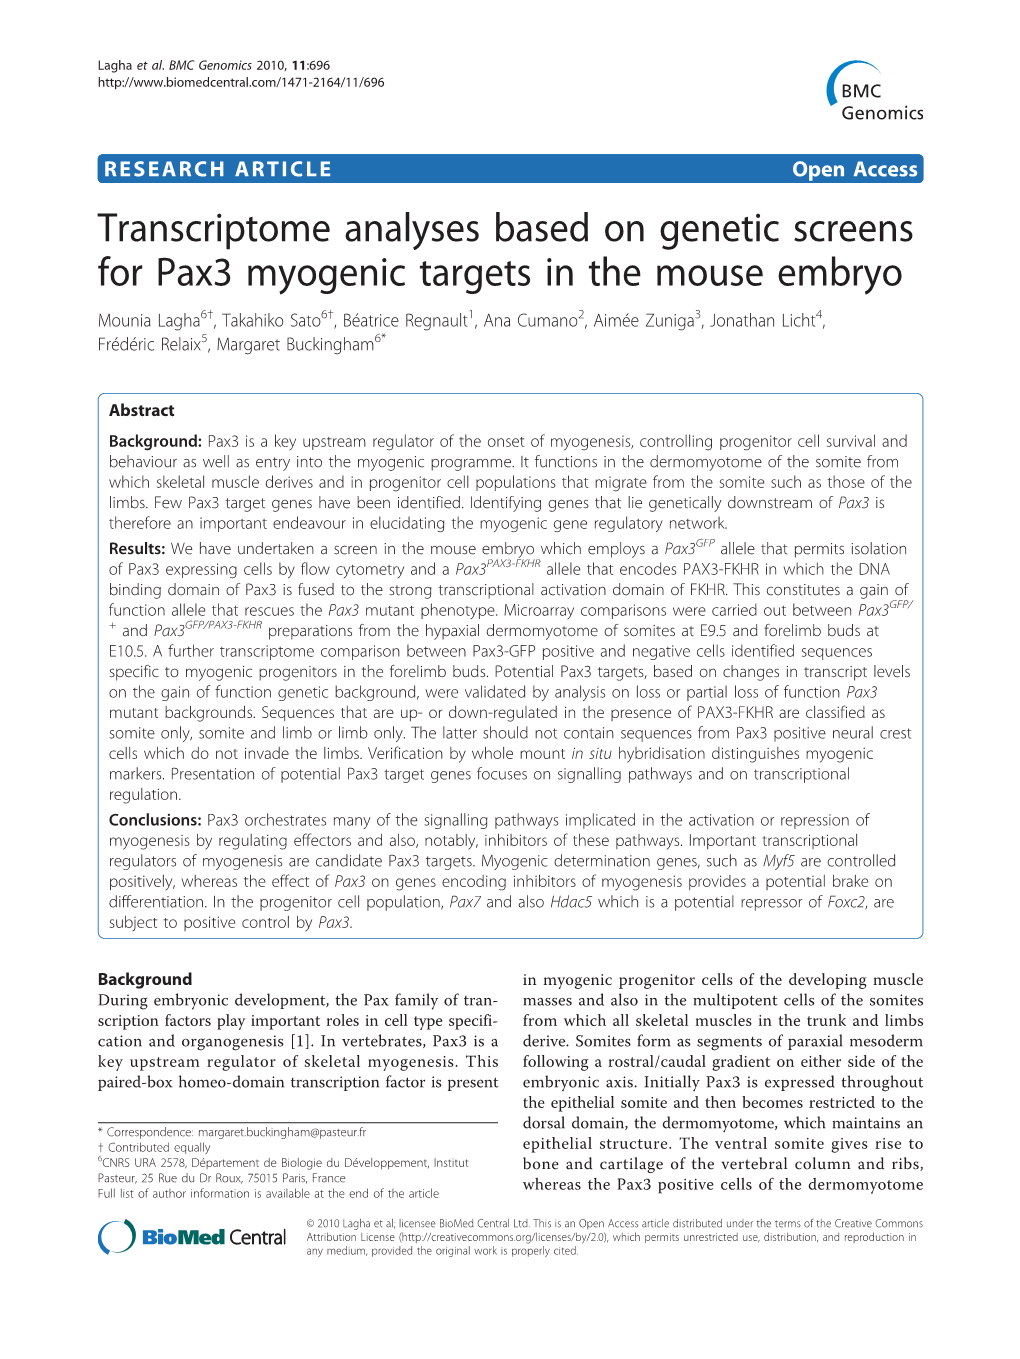 Transcriptome Analyses Based on Genetic Screens